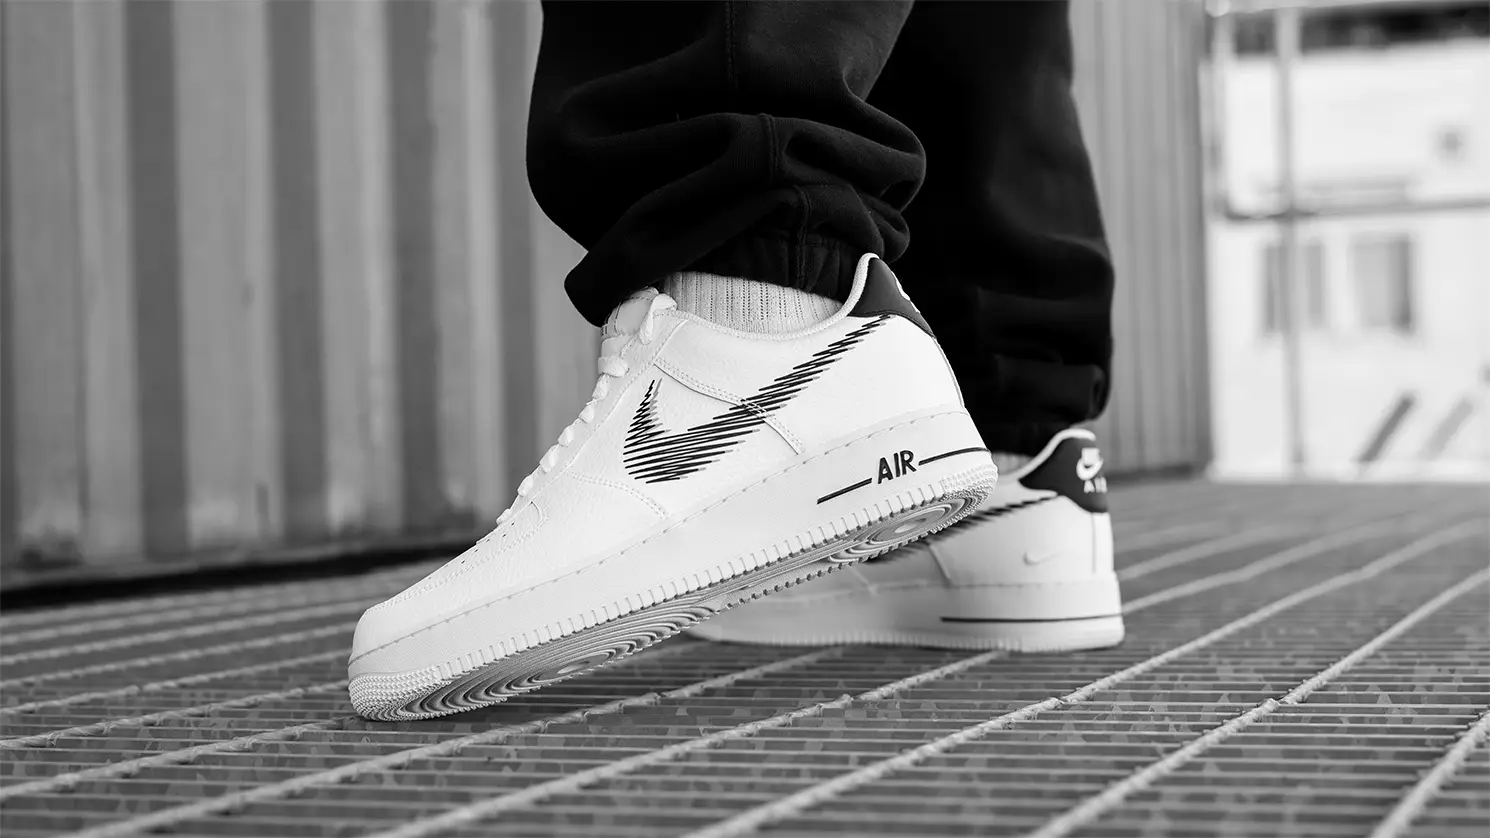 Underrated Nike Air Force 1 Colourways That You Shouldn't Miss | The ...